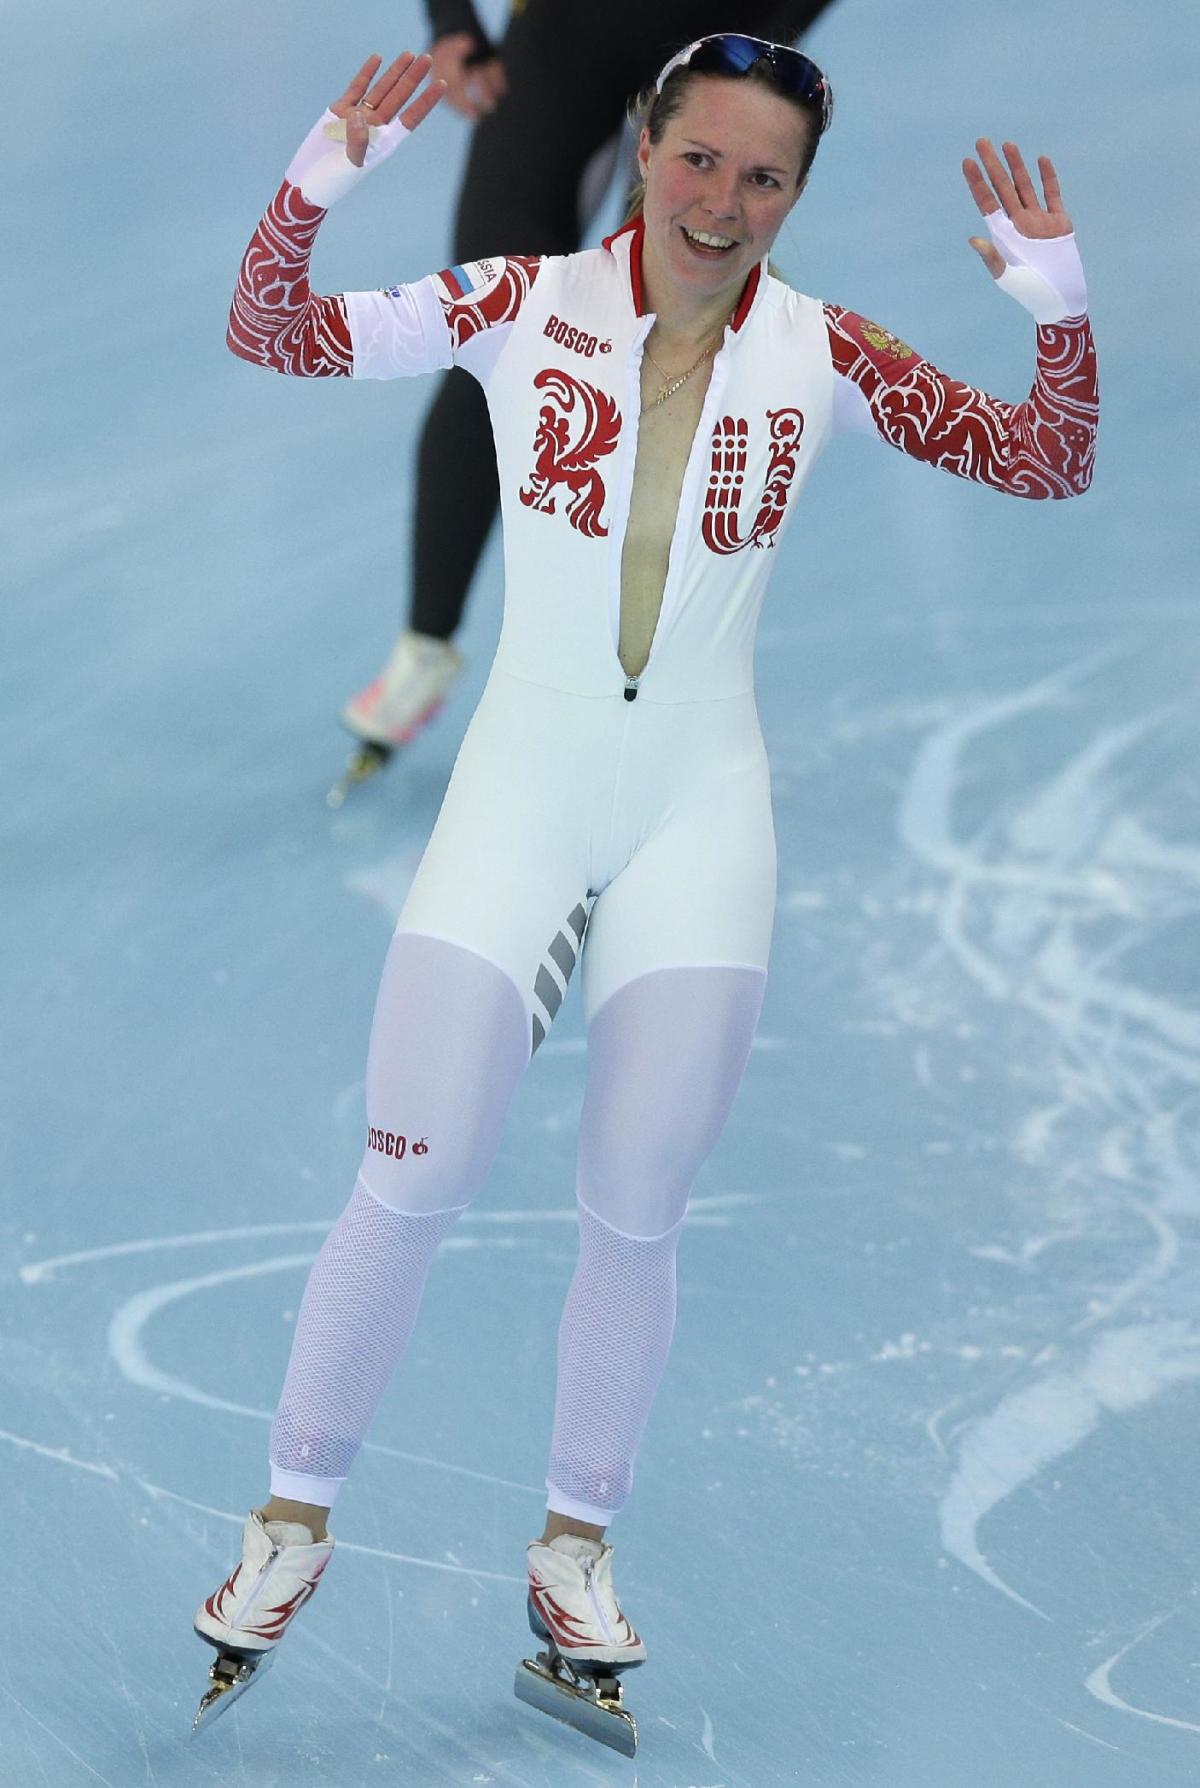 Russian speedskater forgets shes naked